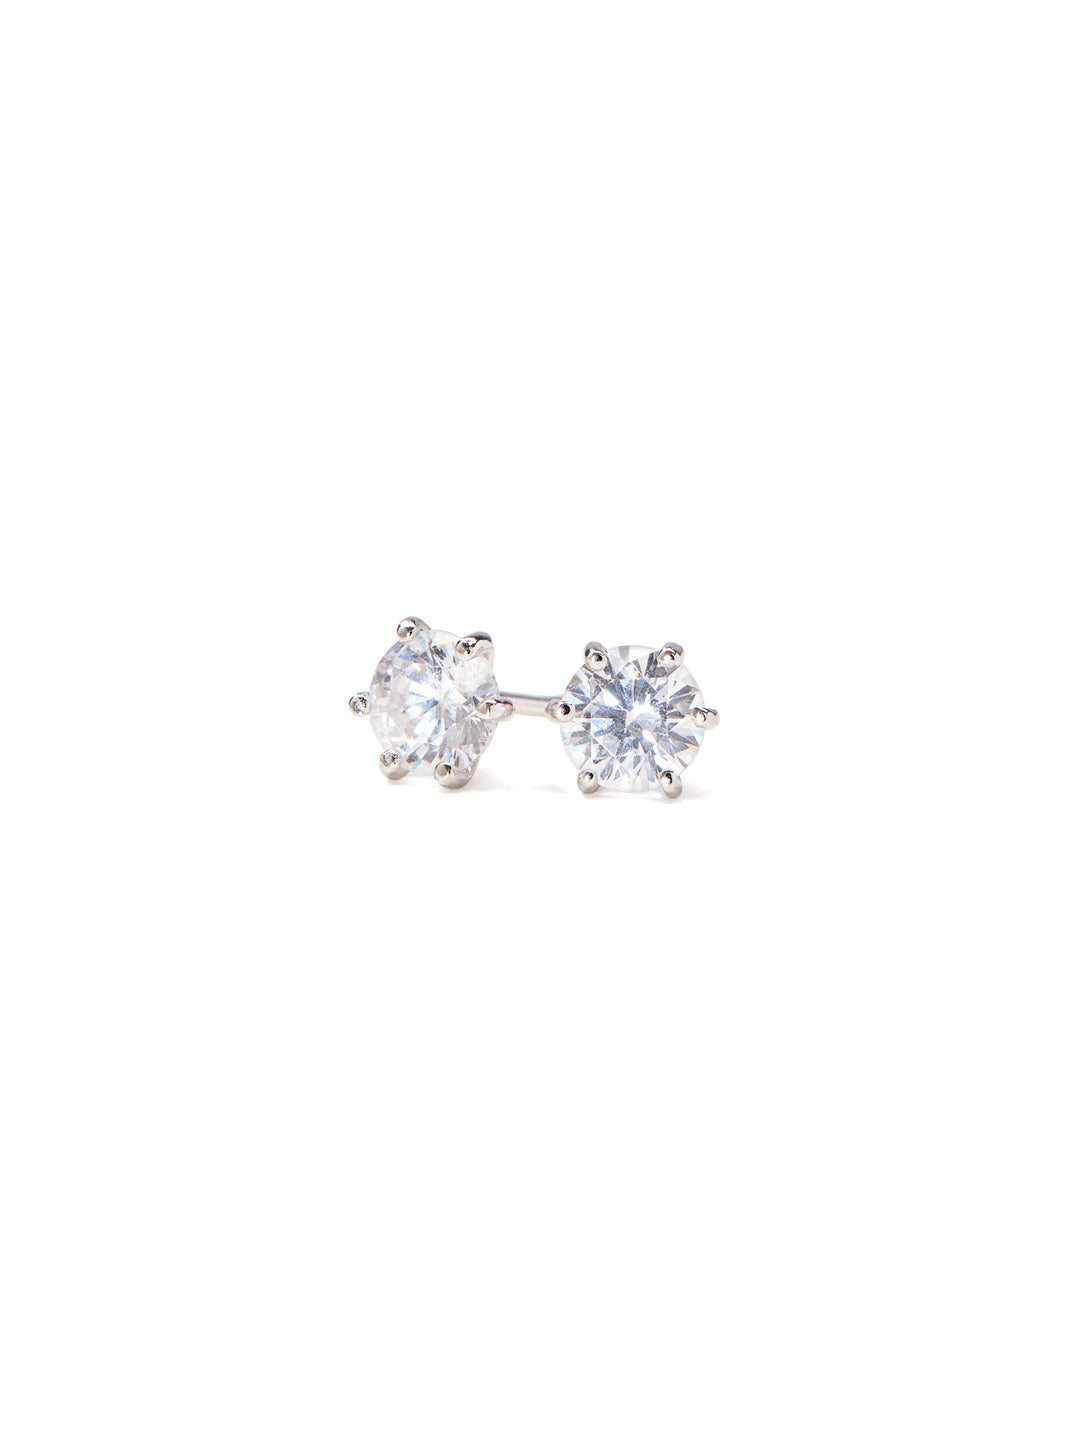 DAINTY - Earrings, Color: White Gold